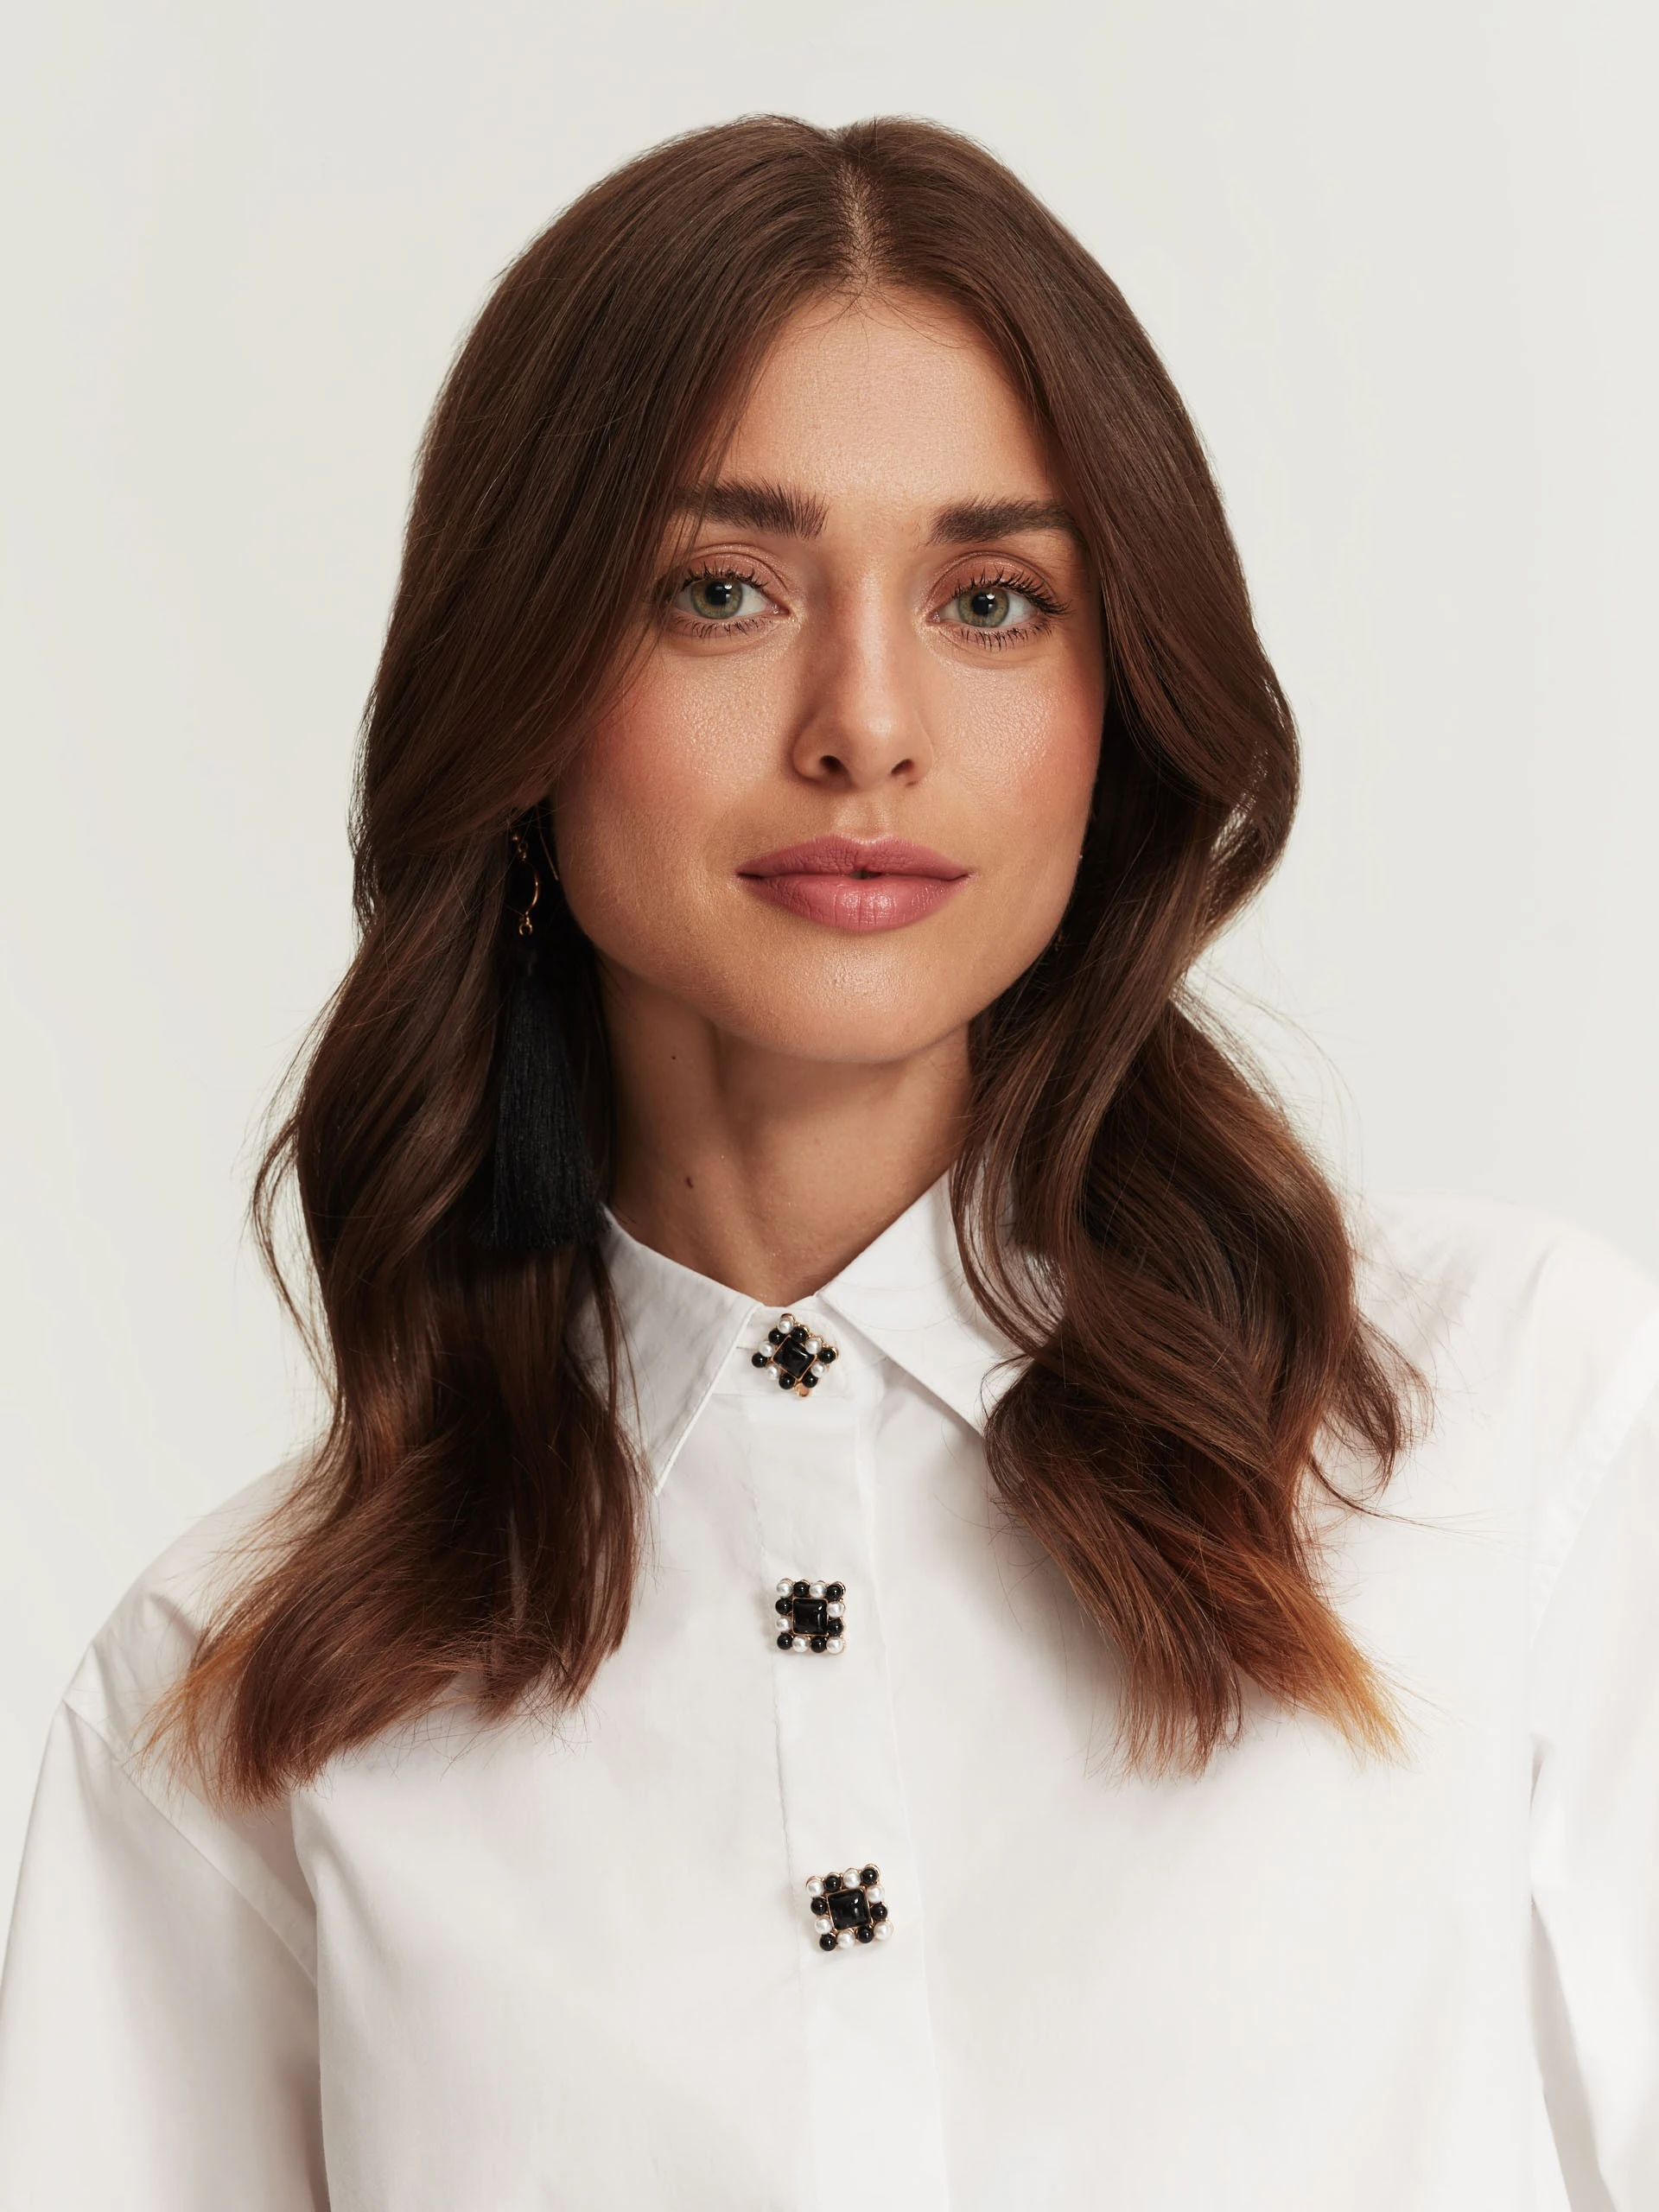 White shirt with decorative buttons